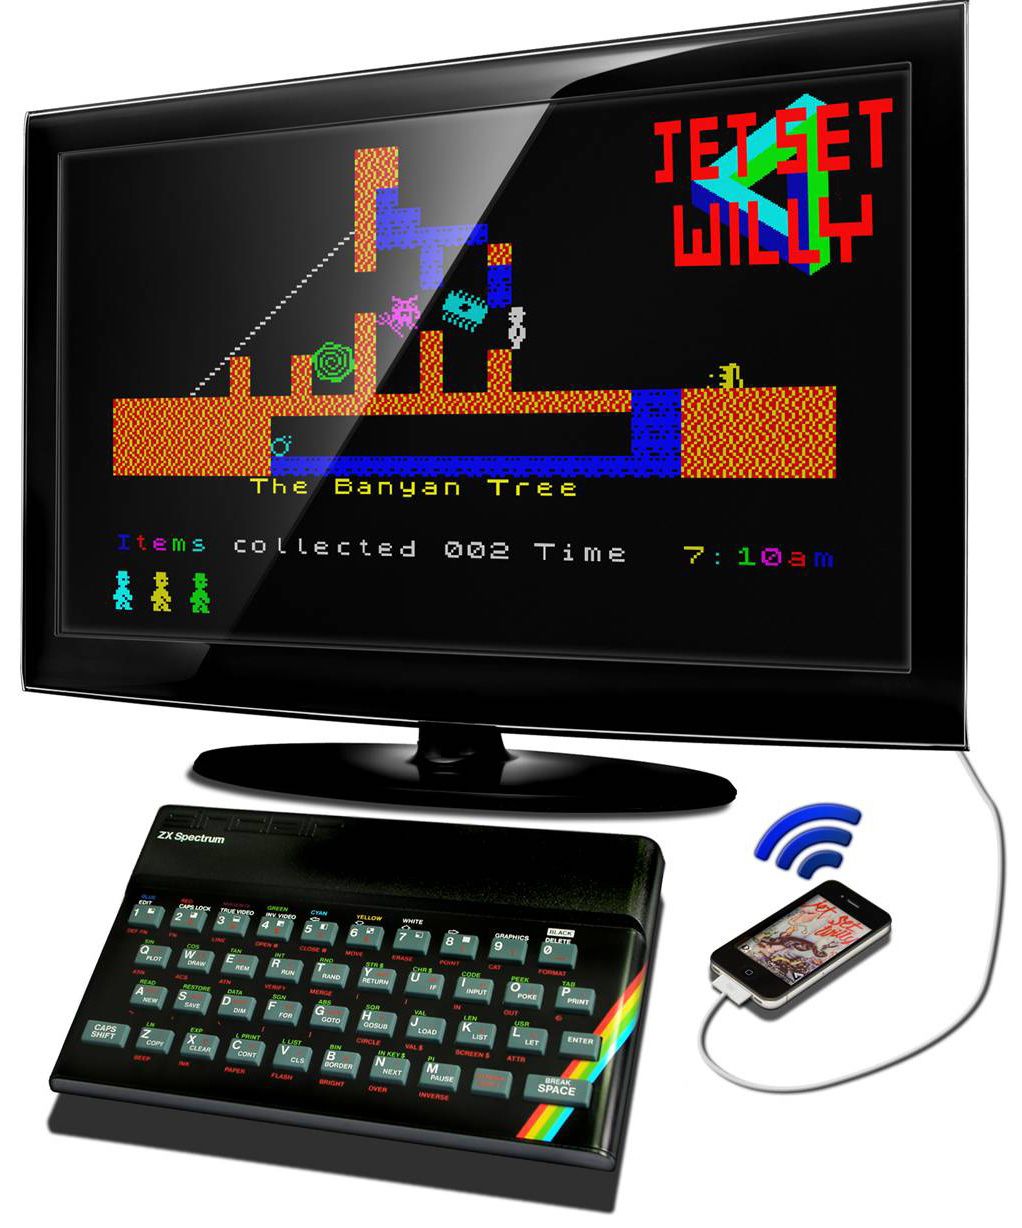 jet set willy coming for iphone and ipad relaunched zx spectrum could work as bluetooth controller image 3